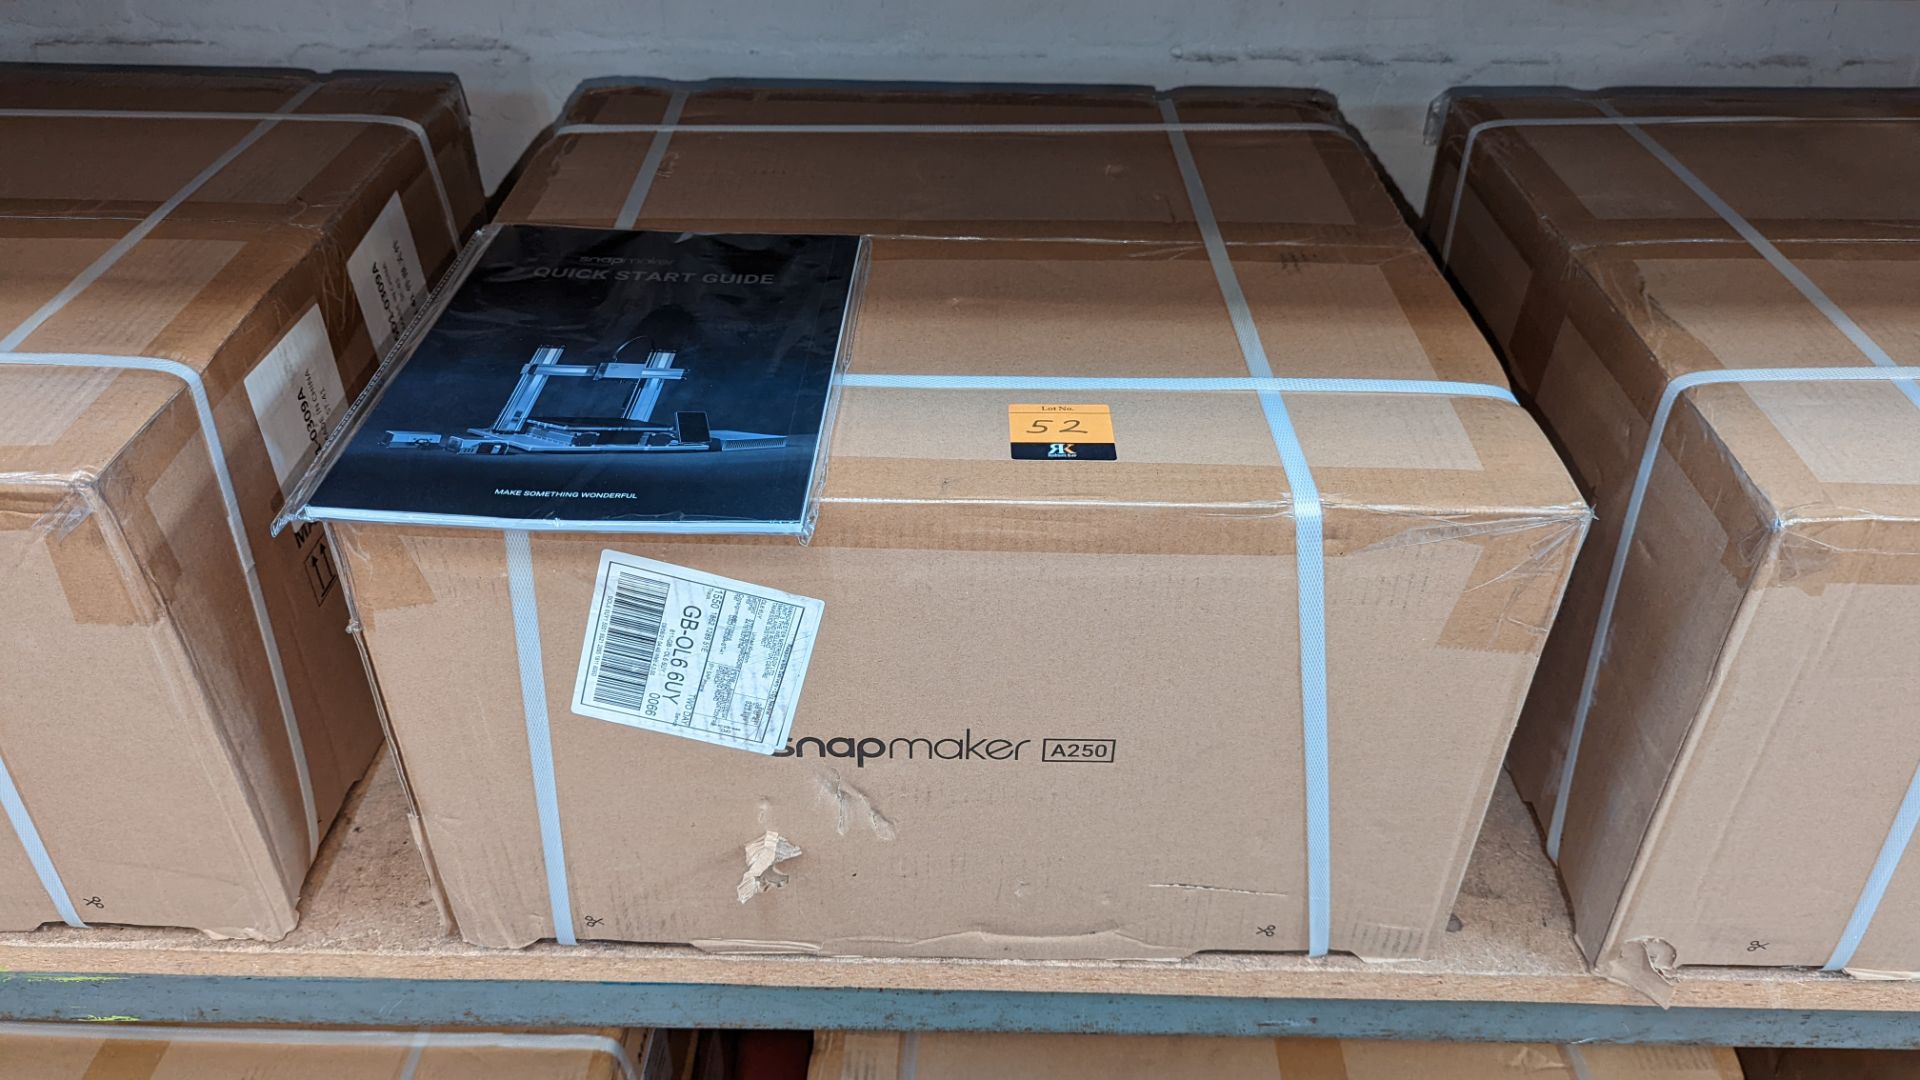 Snapmaker model A250 3D printer - boxed, delivered with original banding, assumed to be new/unused